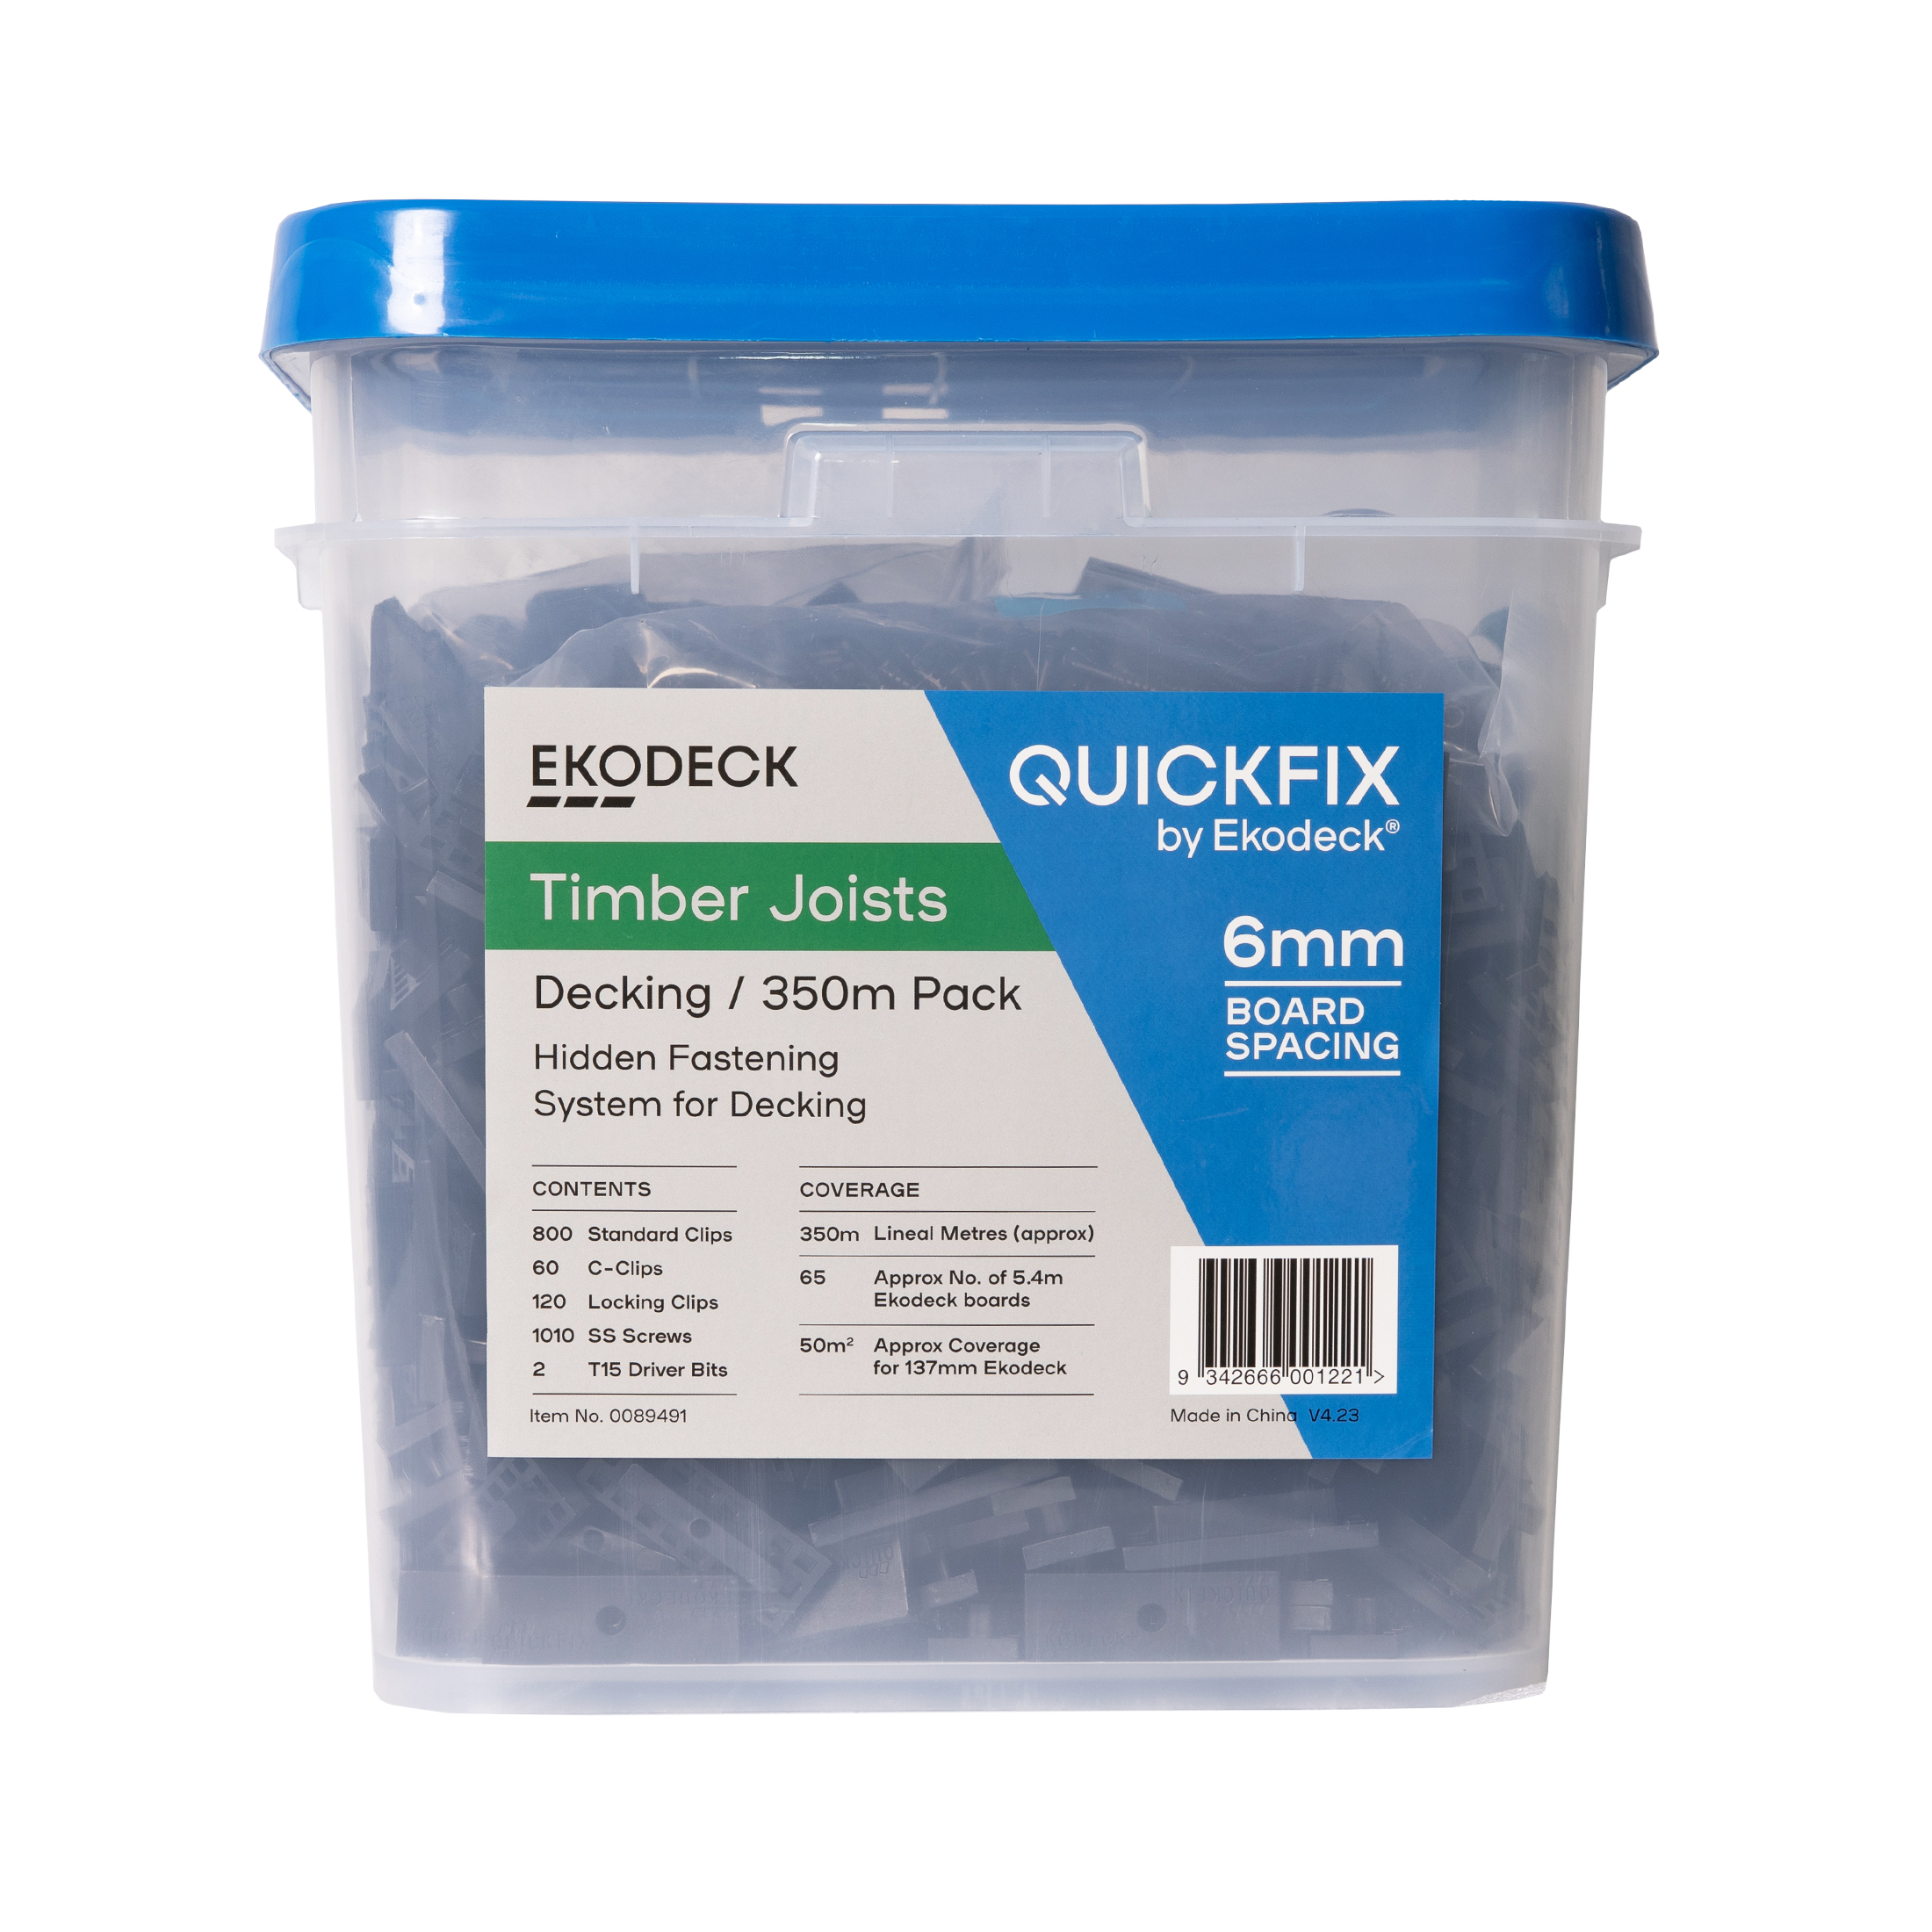 Quickfix for Ekodeck 6mm 350lm Trade Kit - Timber Joists